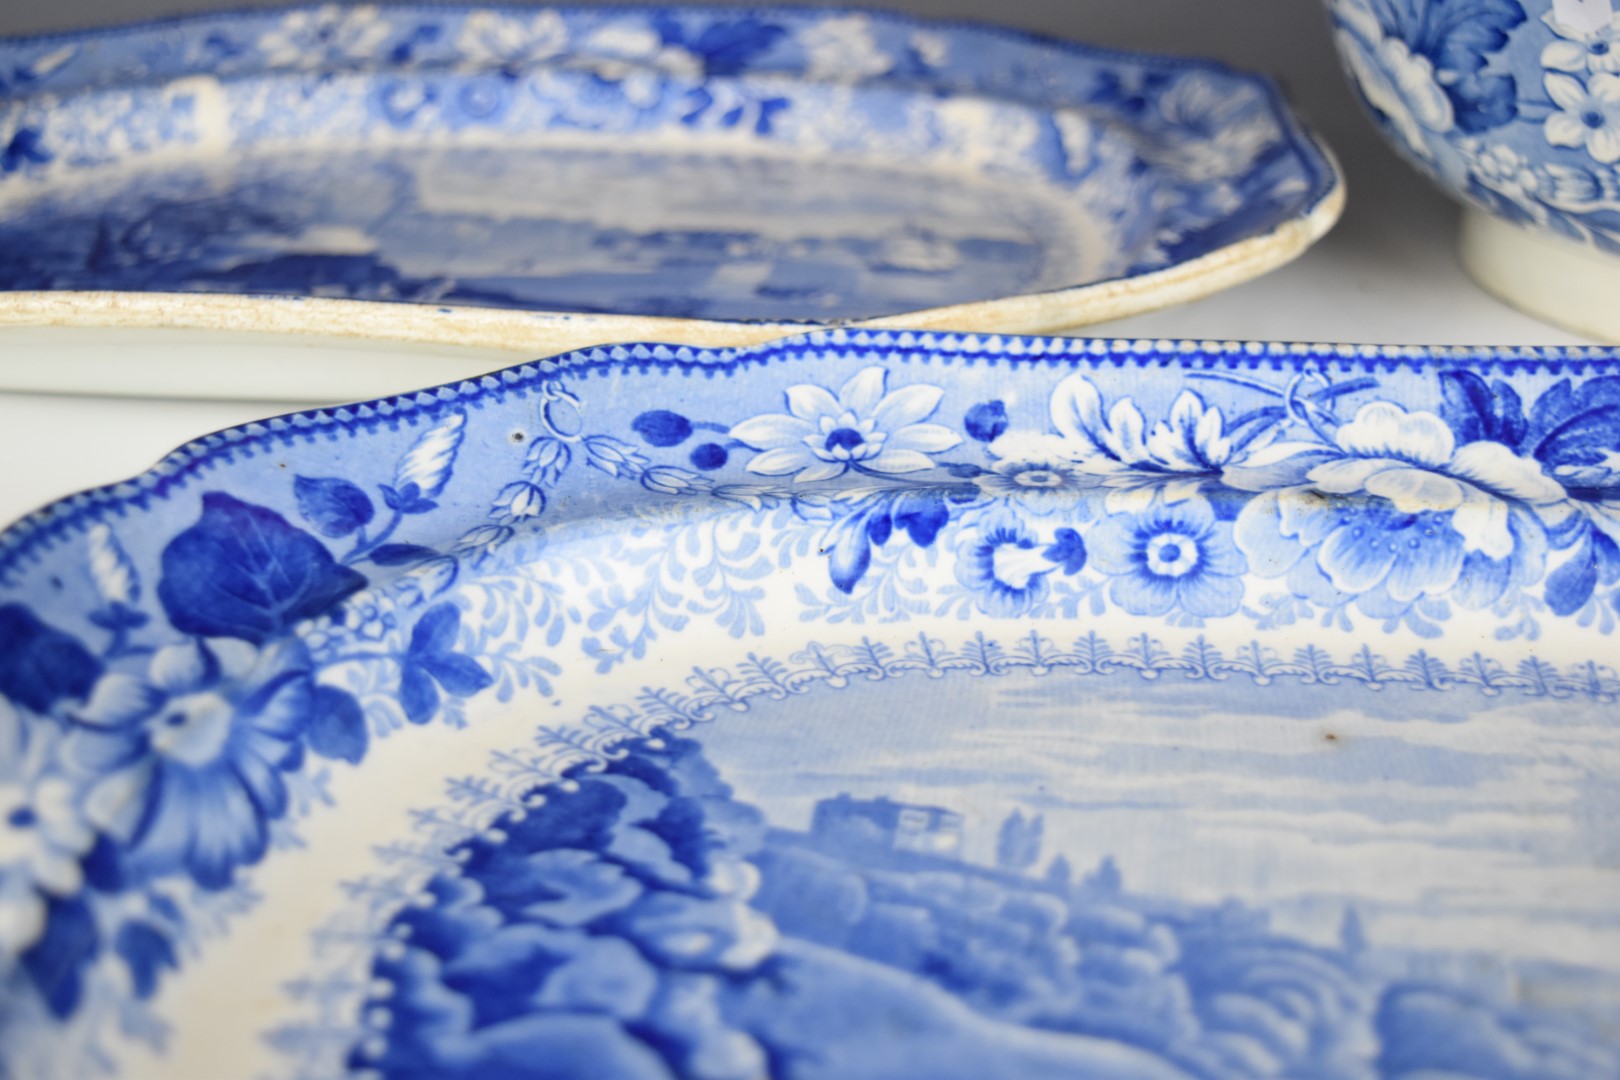 19thC blue and white transfer printed ware with named scenes of Bristol, Clifton and River Avon, - Image 3 of 10